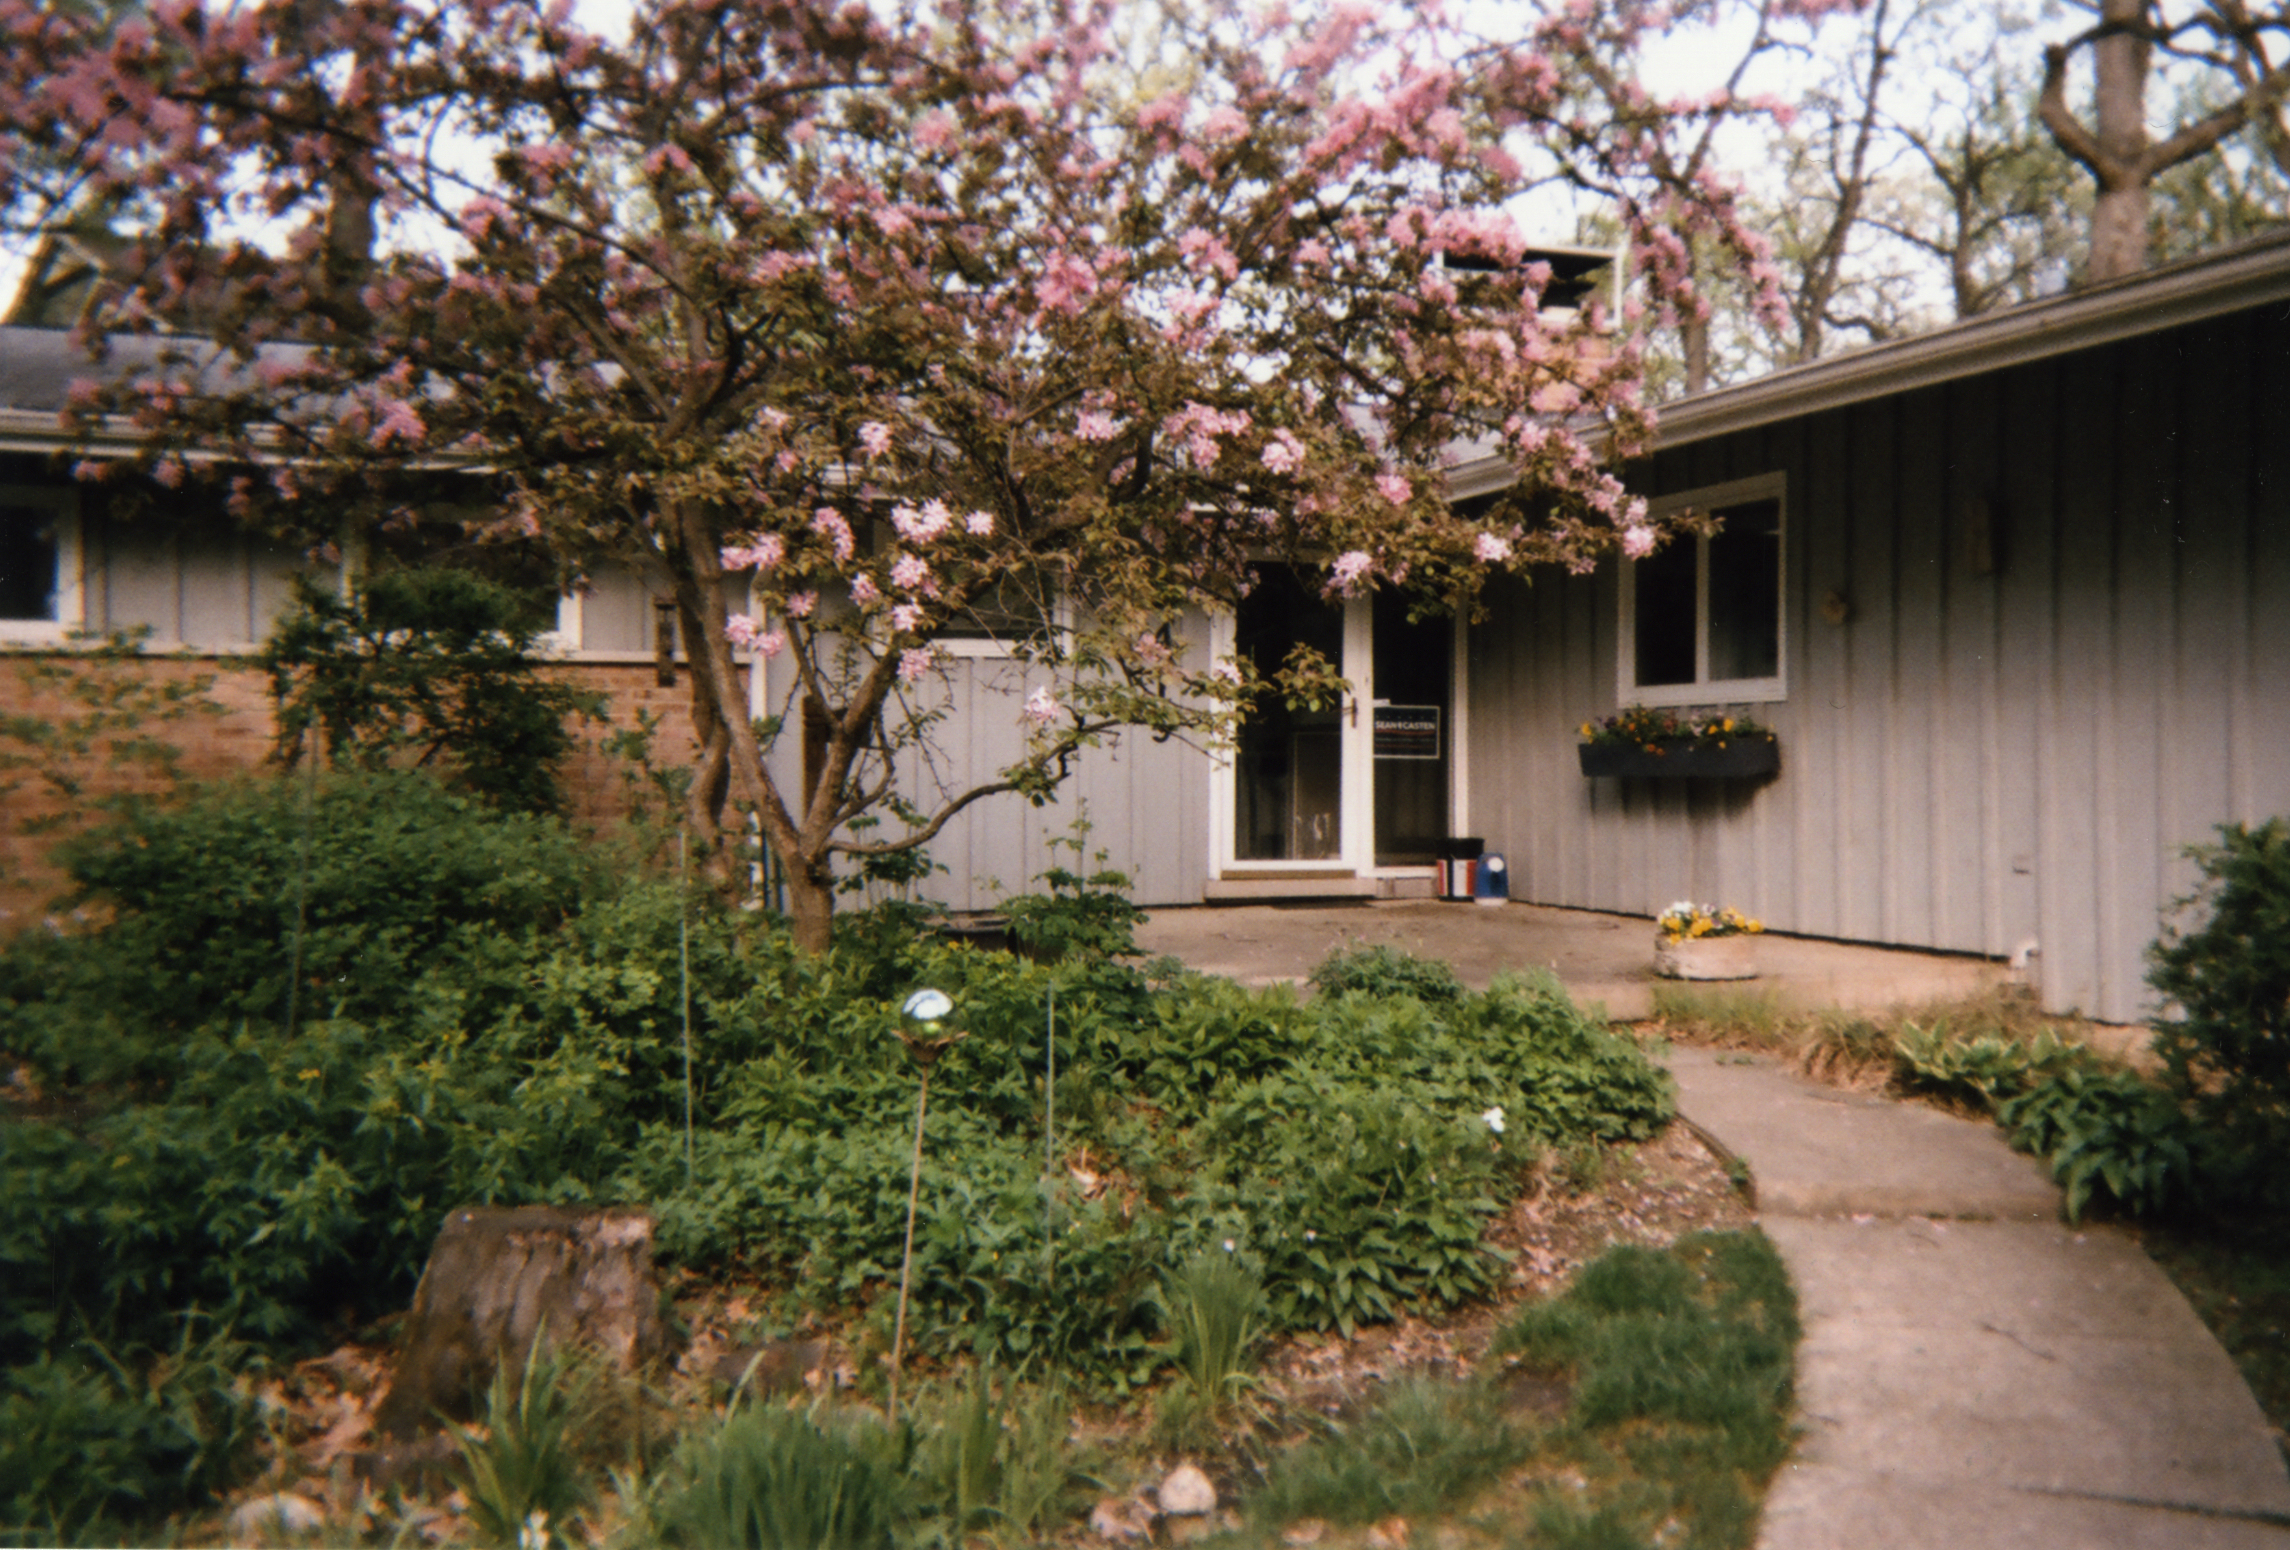 Flowering crabapple tree in front of house